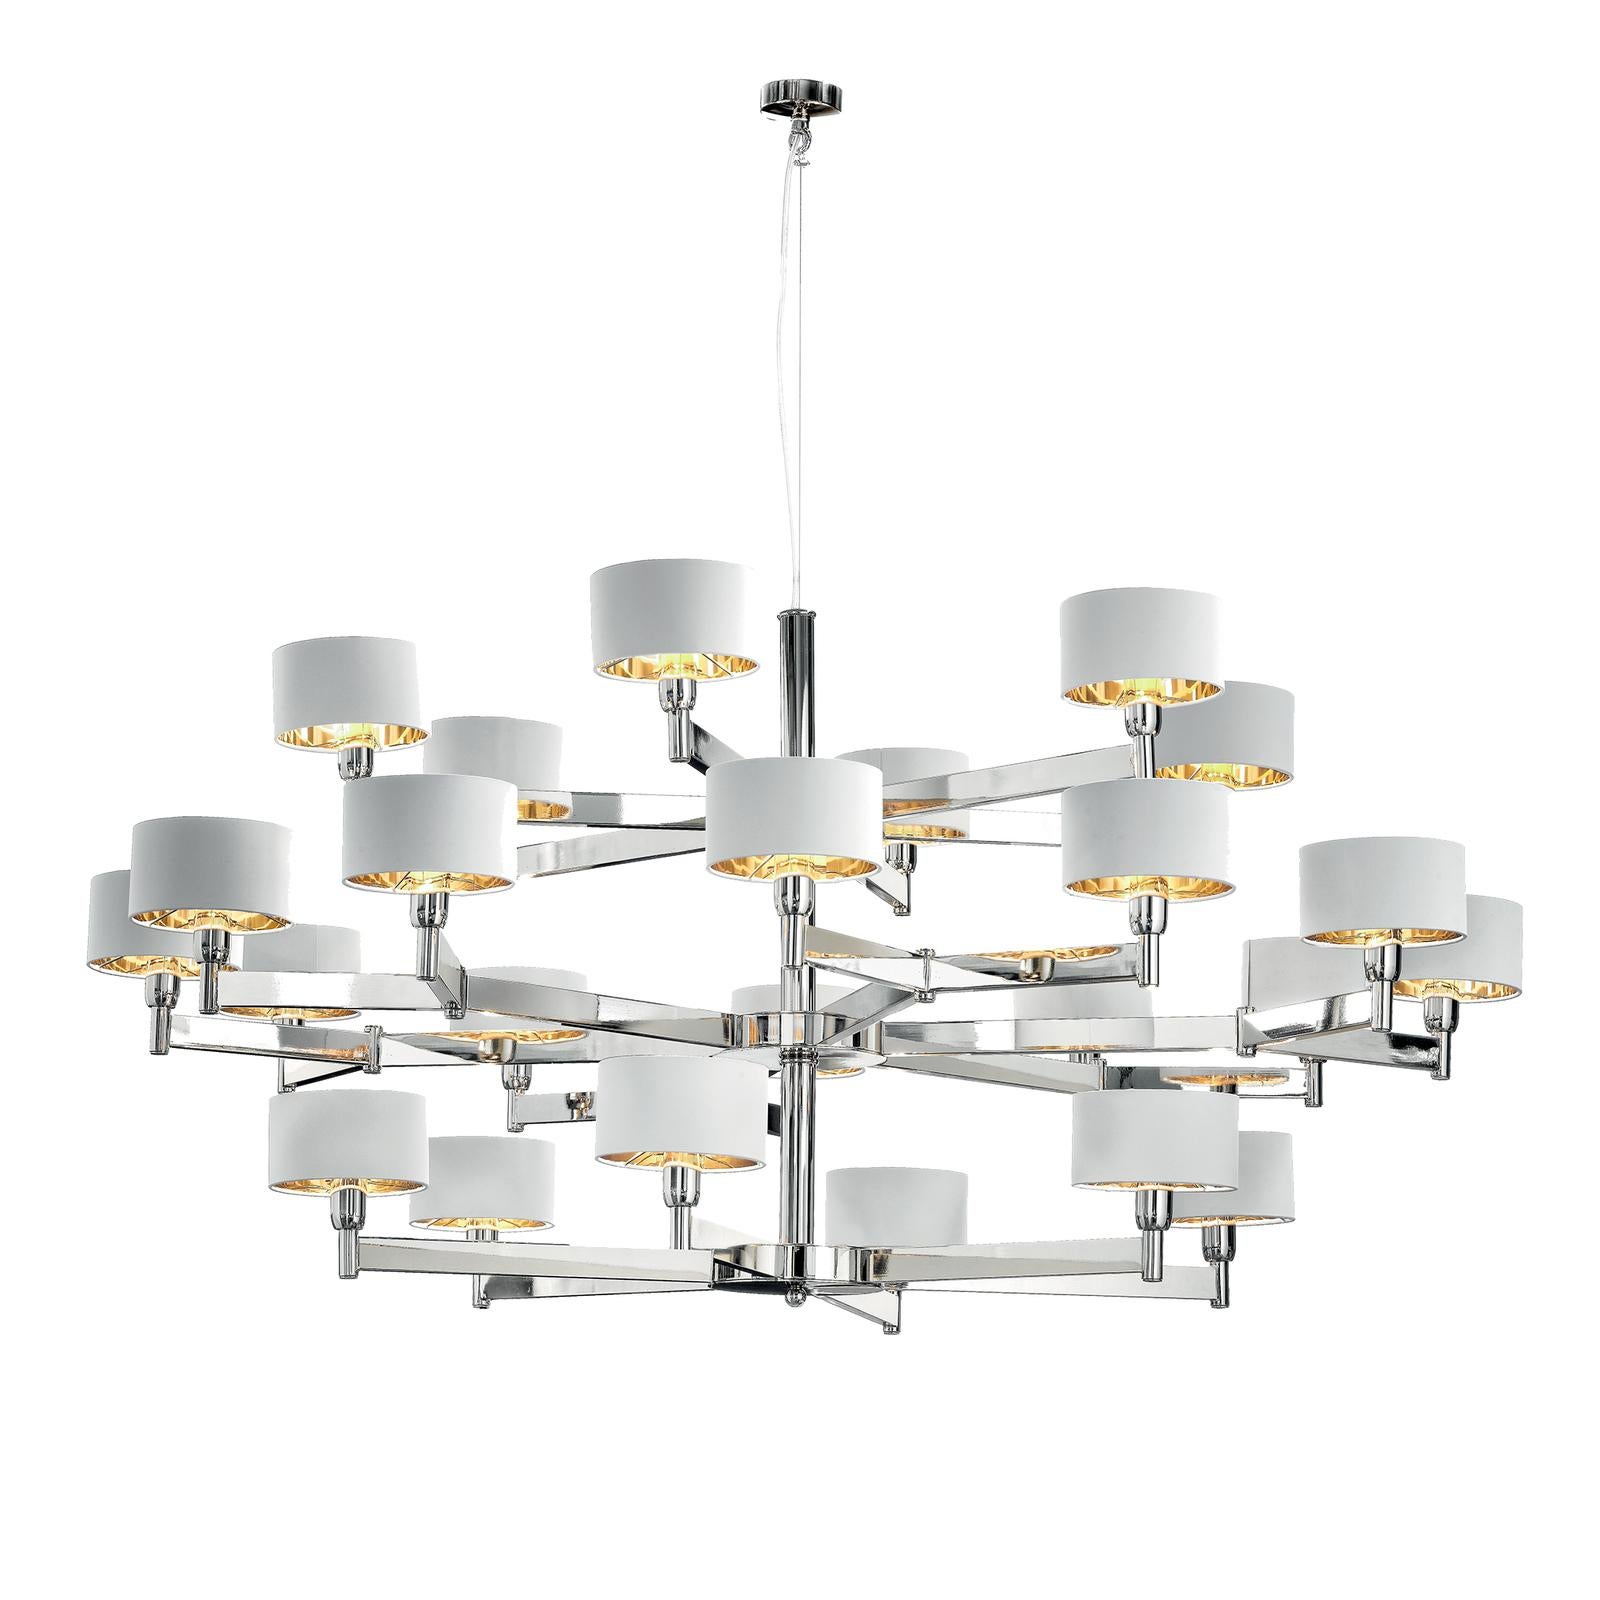 Recreating the mesmerizing movements and lightness of a butterfly, this stunning chandelier is a celebration of contemporary design and natural inspirations. The structure is in metal with a polished nickel finish that hangs from a vertical 50 cm